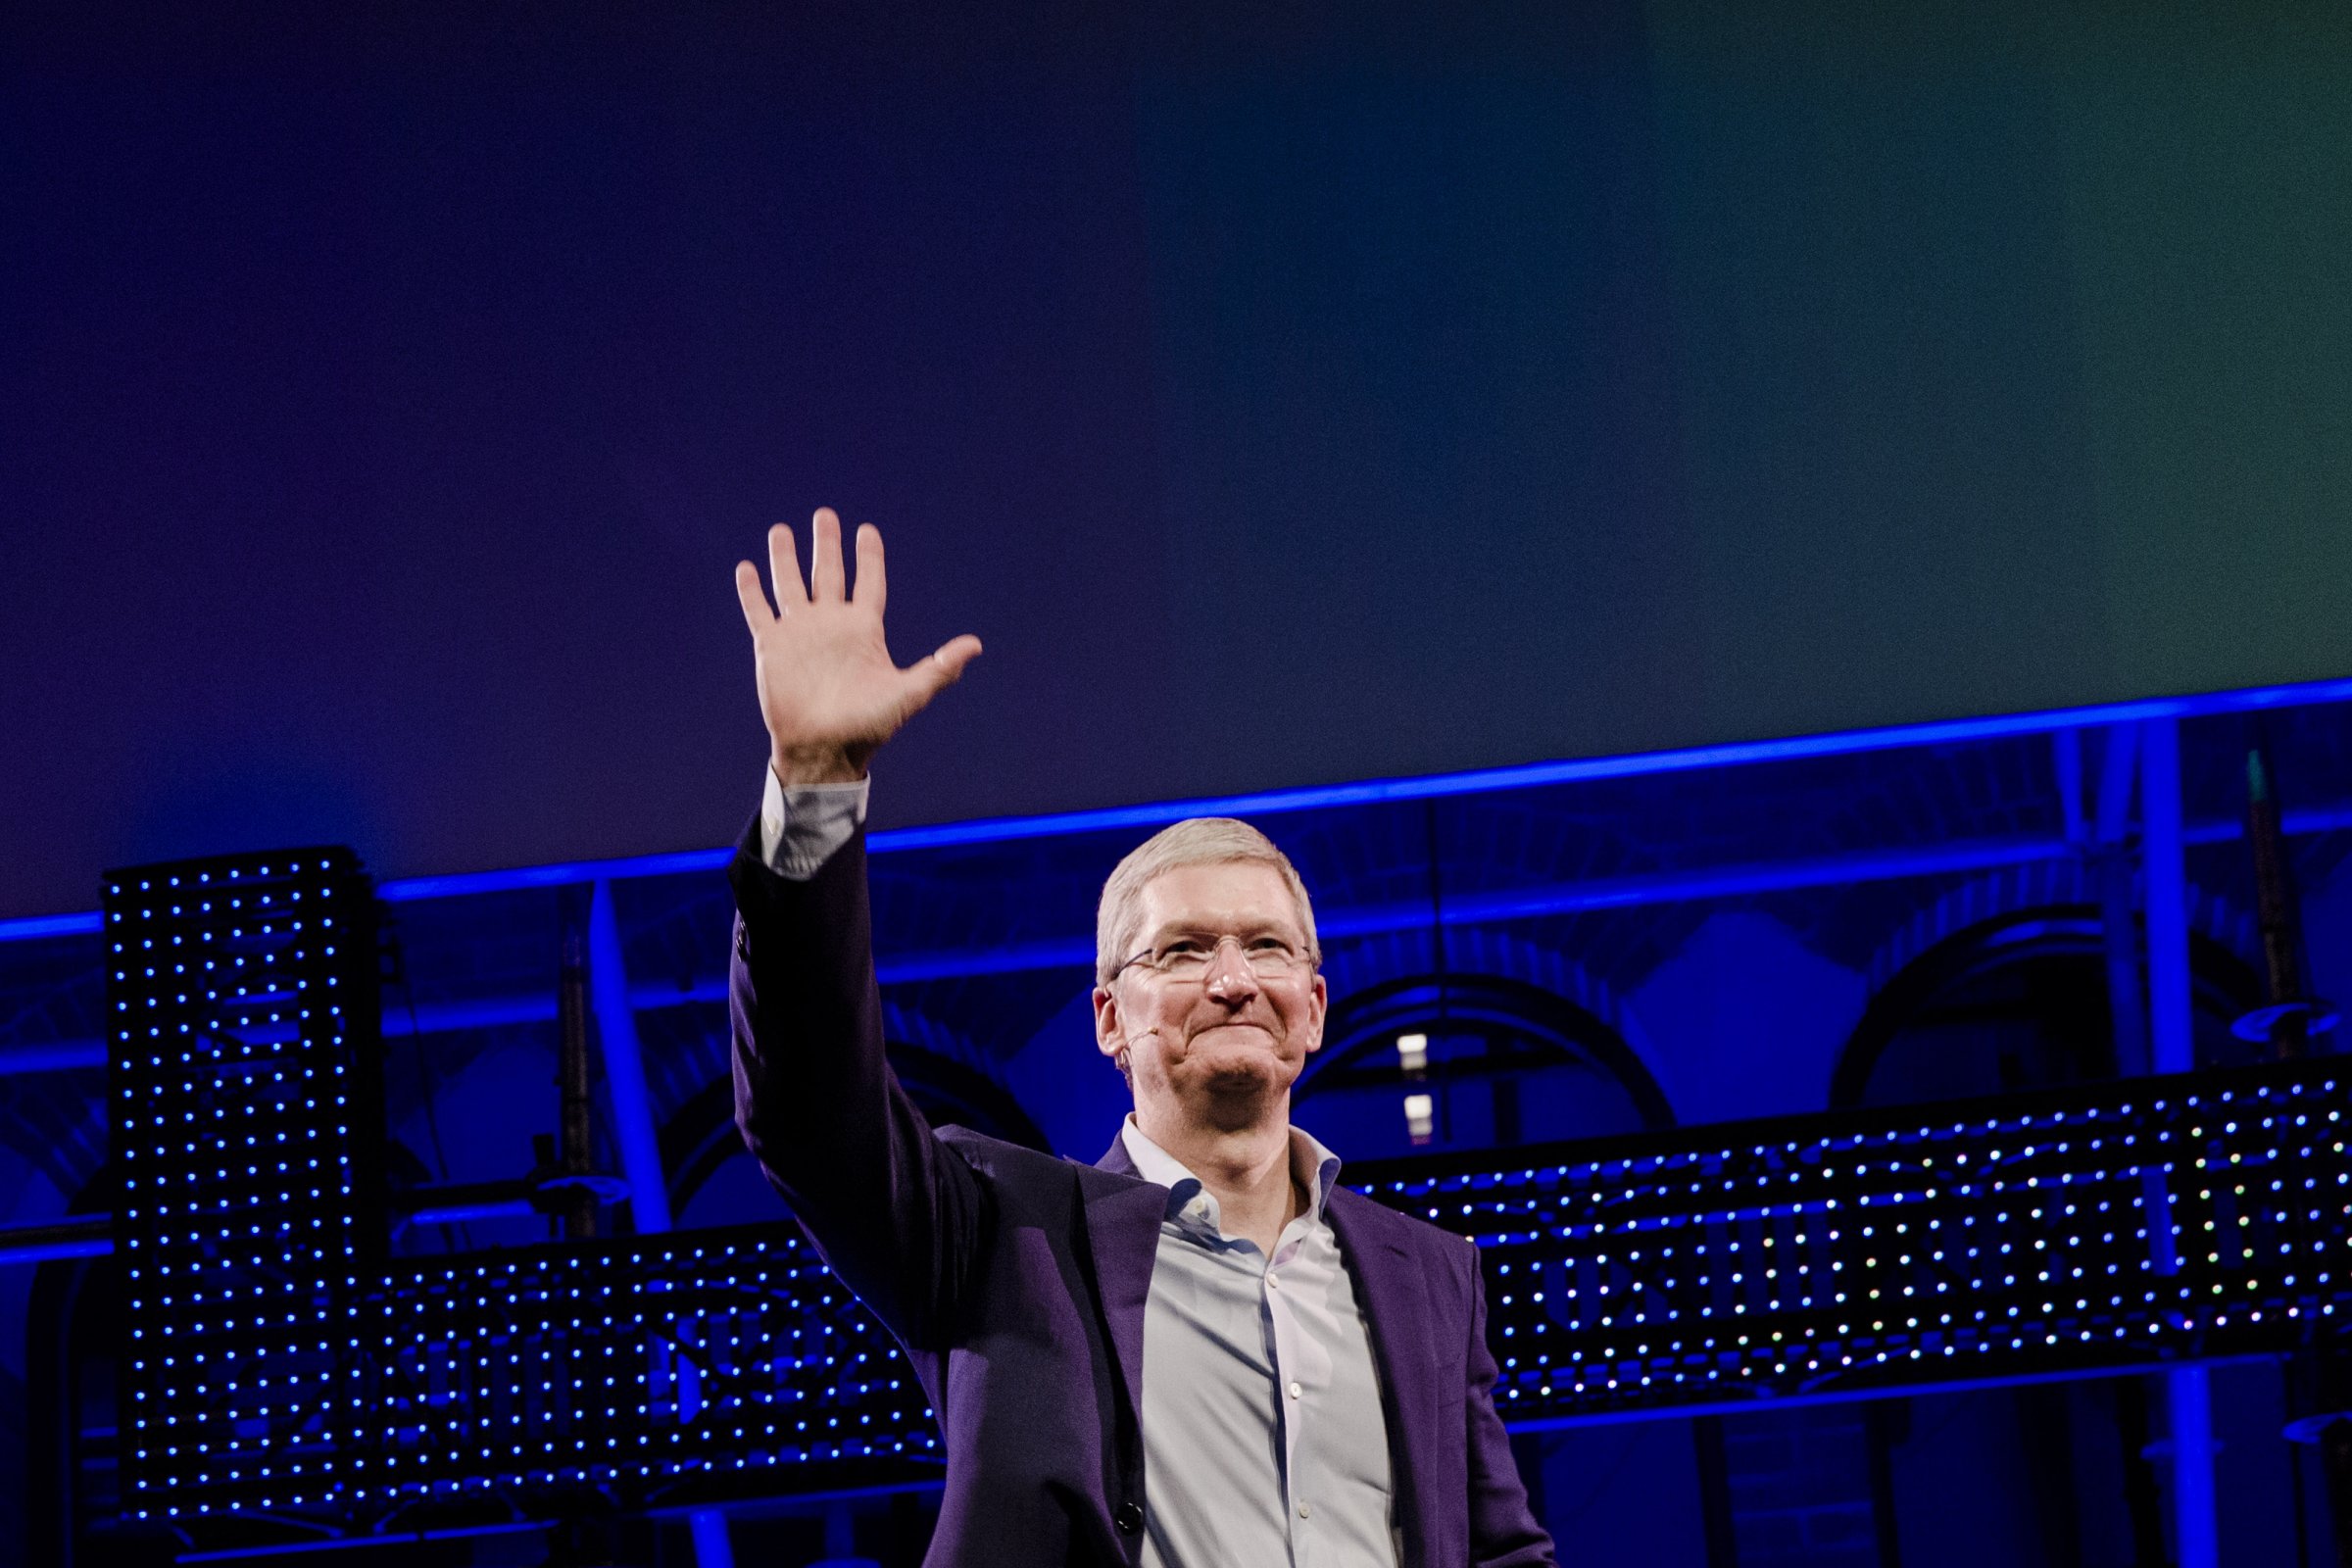 Tim Cook, chief executive officer of Apple Inc., waves to the audience during the opening of "Startup Fest", a five-day conference to showcase Dutch innovation, in Amsterdam, Netherlands, on Tuesday, May 24, 2016.